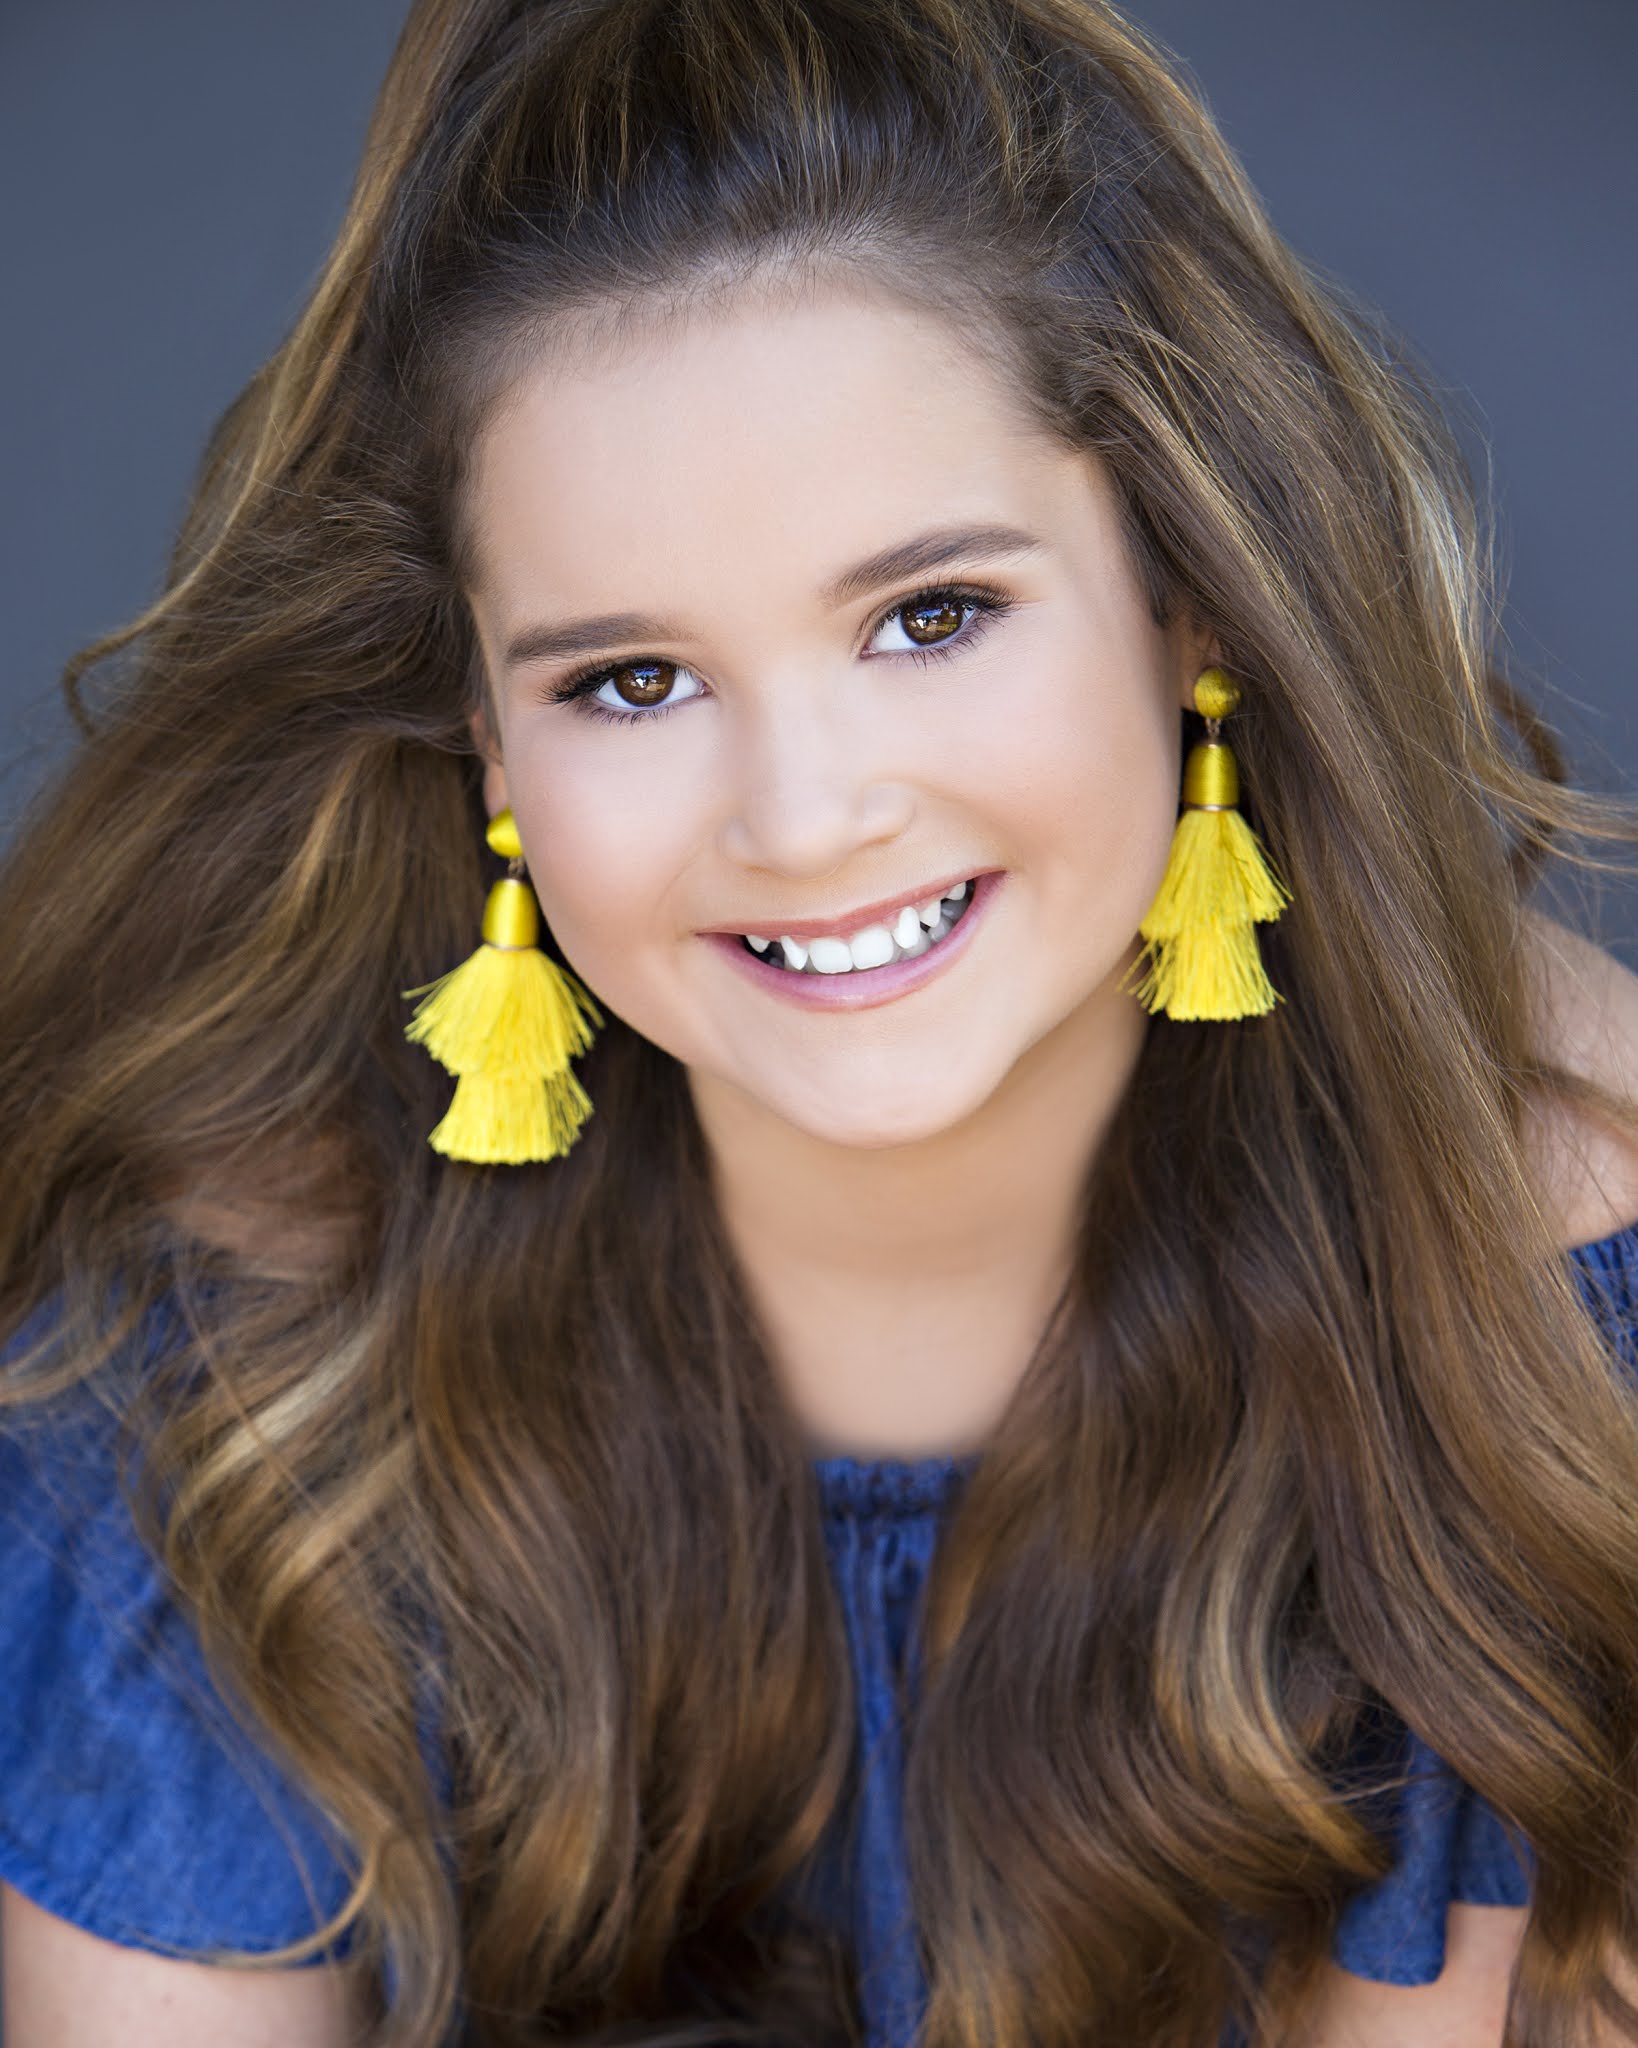 What a Wonderful Year for Miss Texas Pre-Teen!